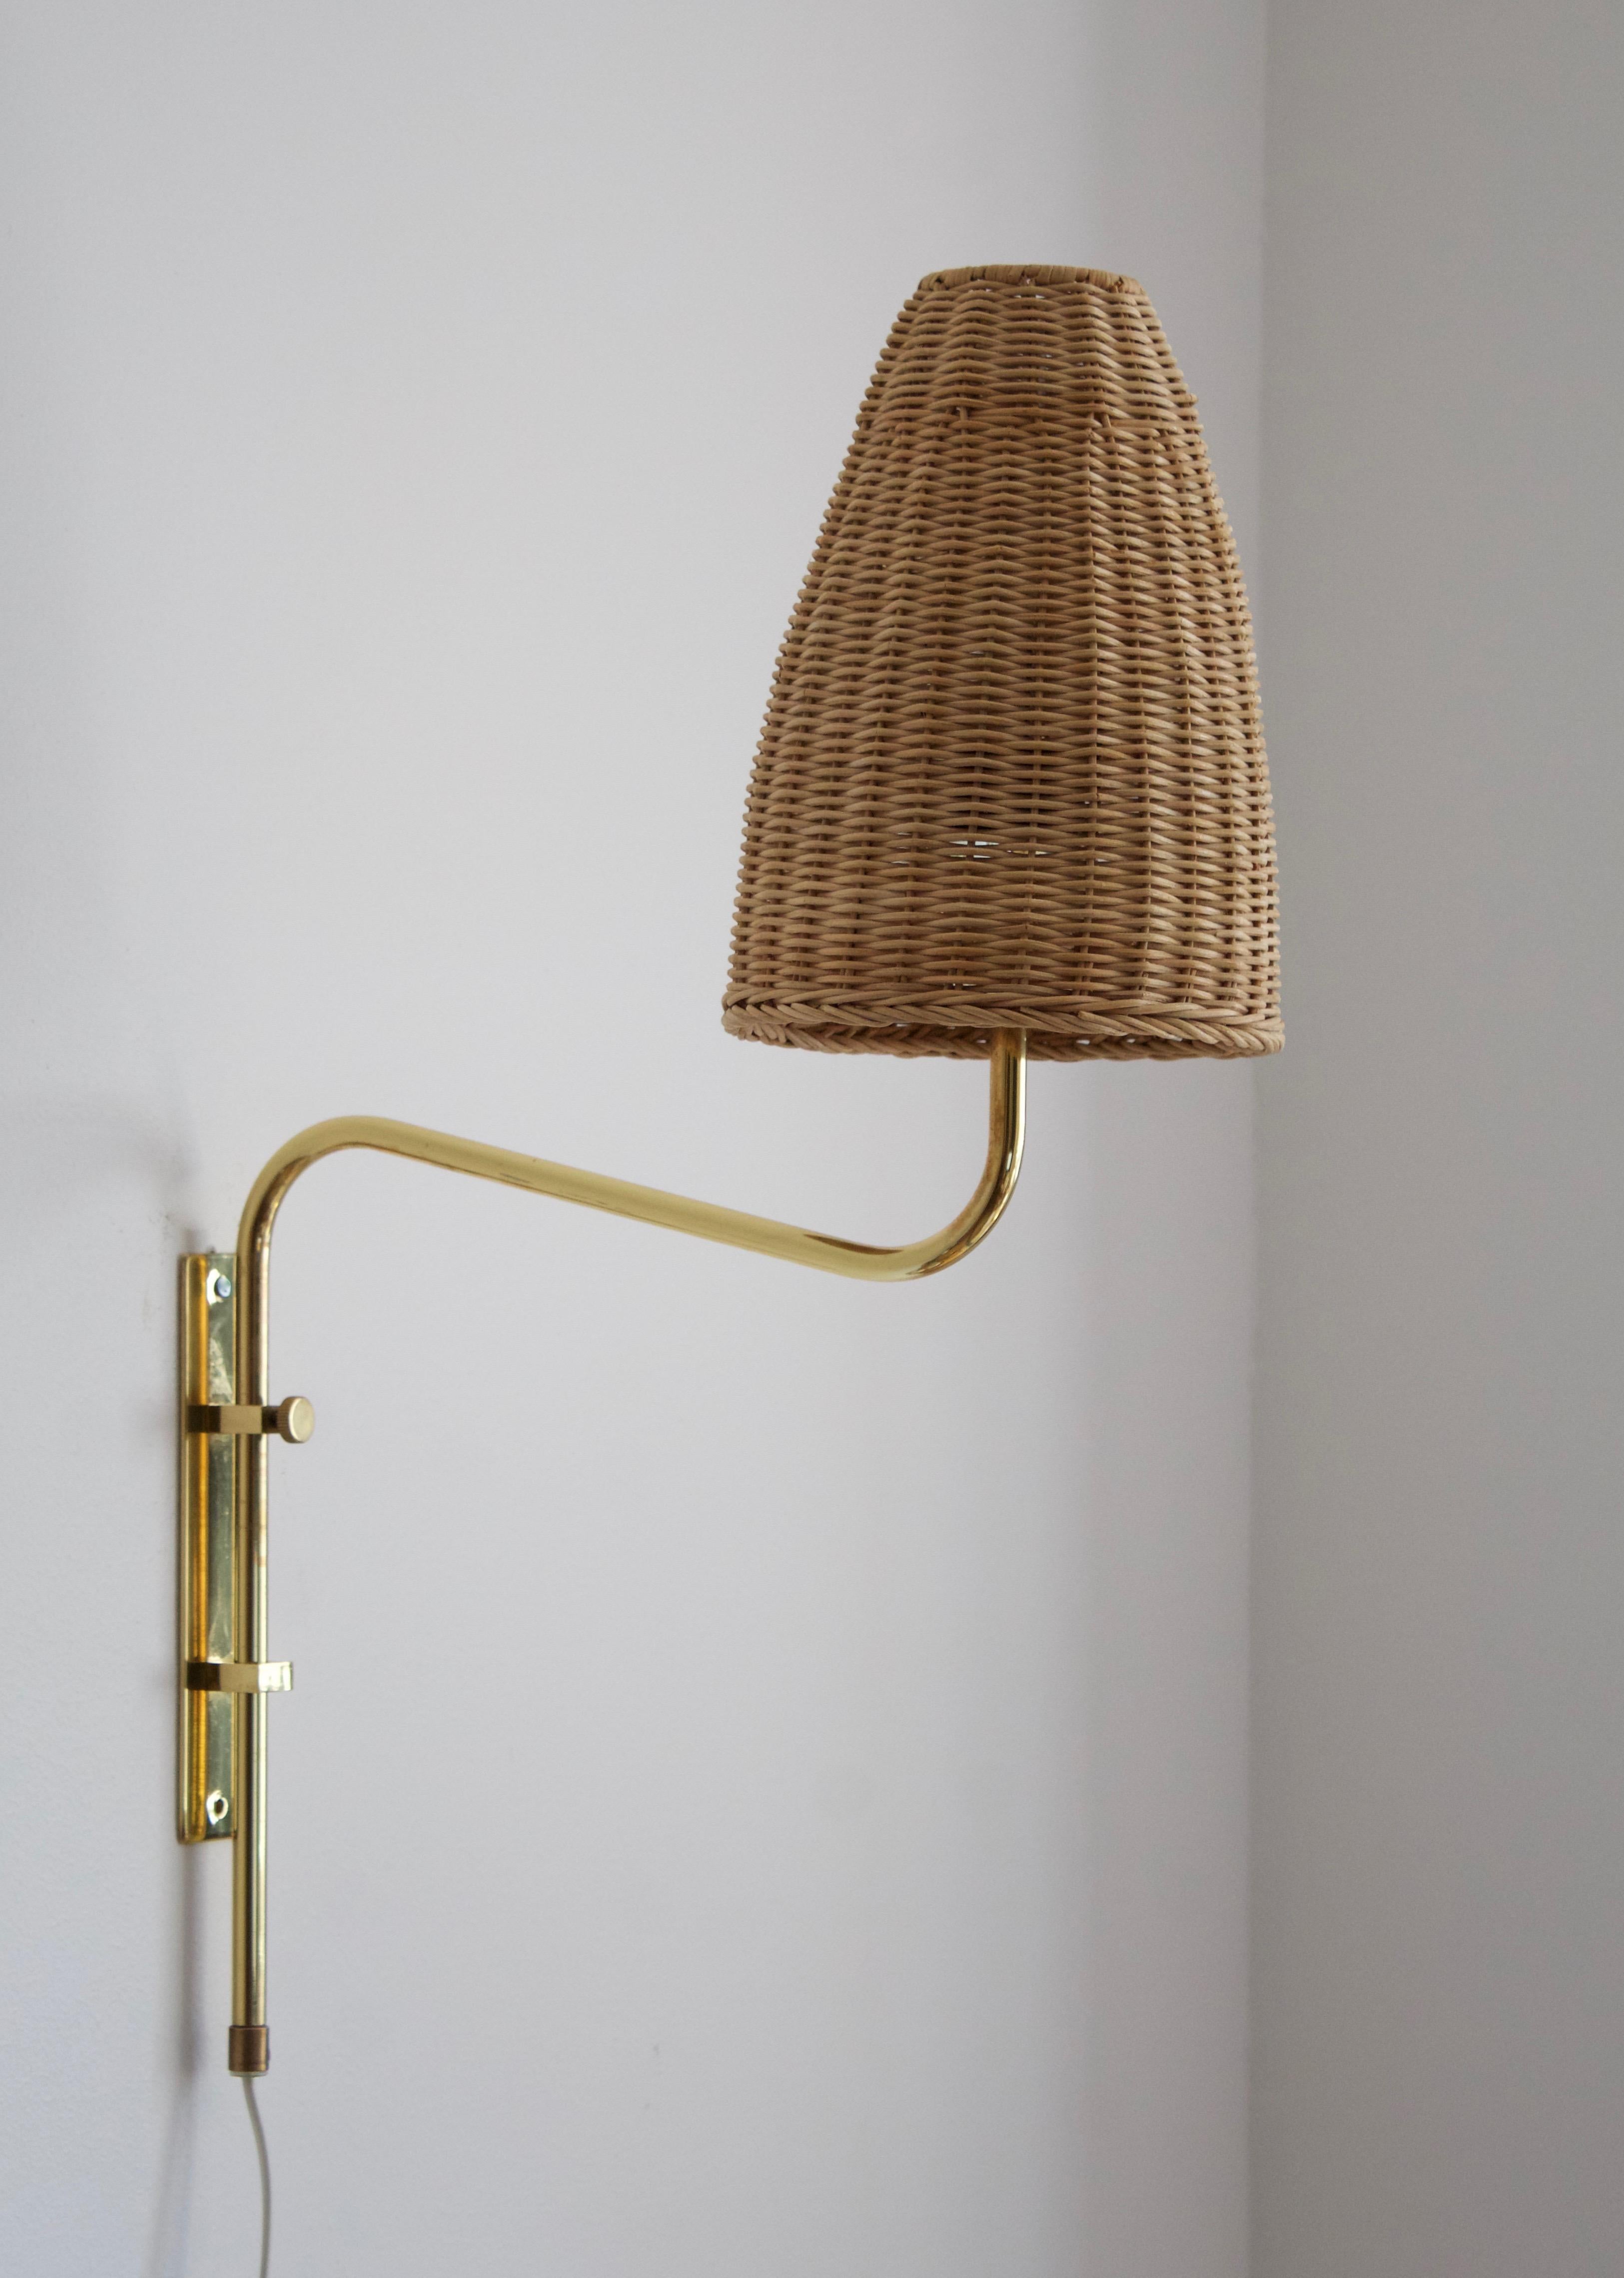 A wall light / wall sconce. Designed and produced by Bergboms, Sweden, c. 1970s. Labeled. Assorted vintage rattan lampshade.

Measurements include lampshade. 

Other designers of the period include Paavo Tynell, Hans Bergström, Josef Frank, and